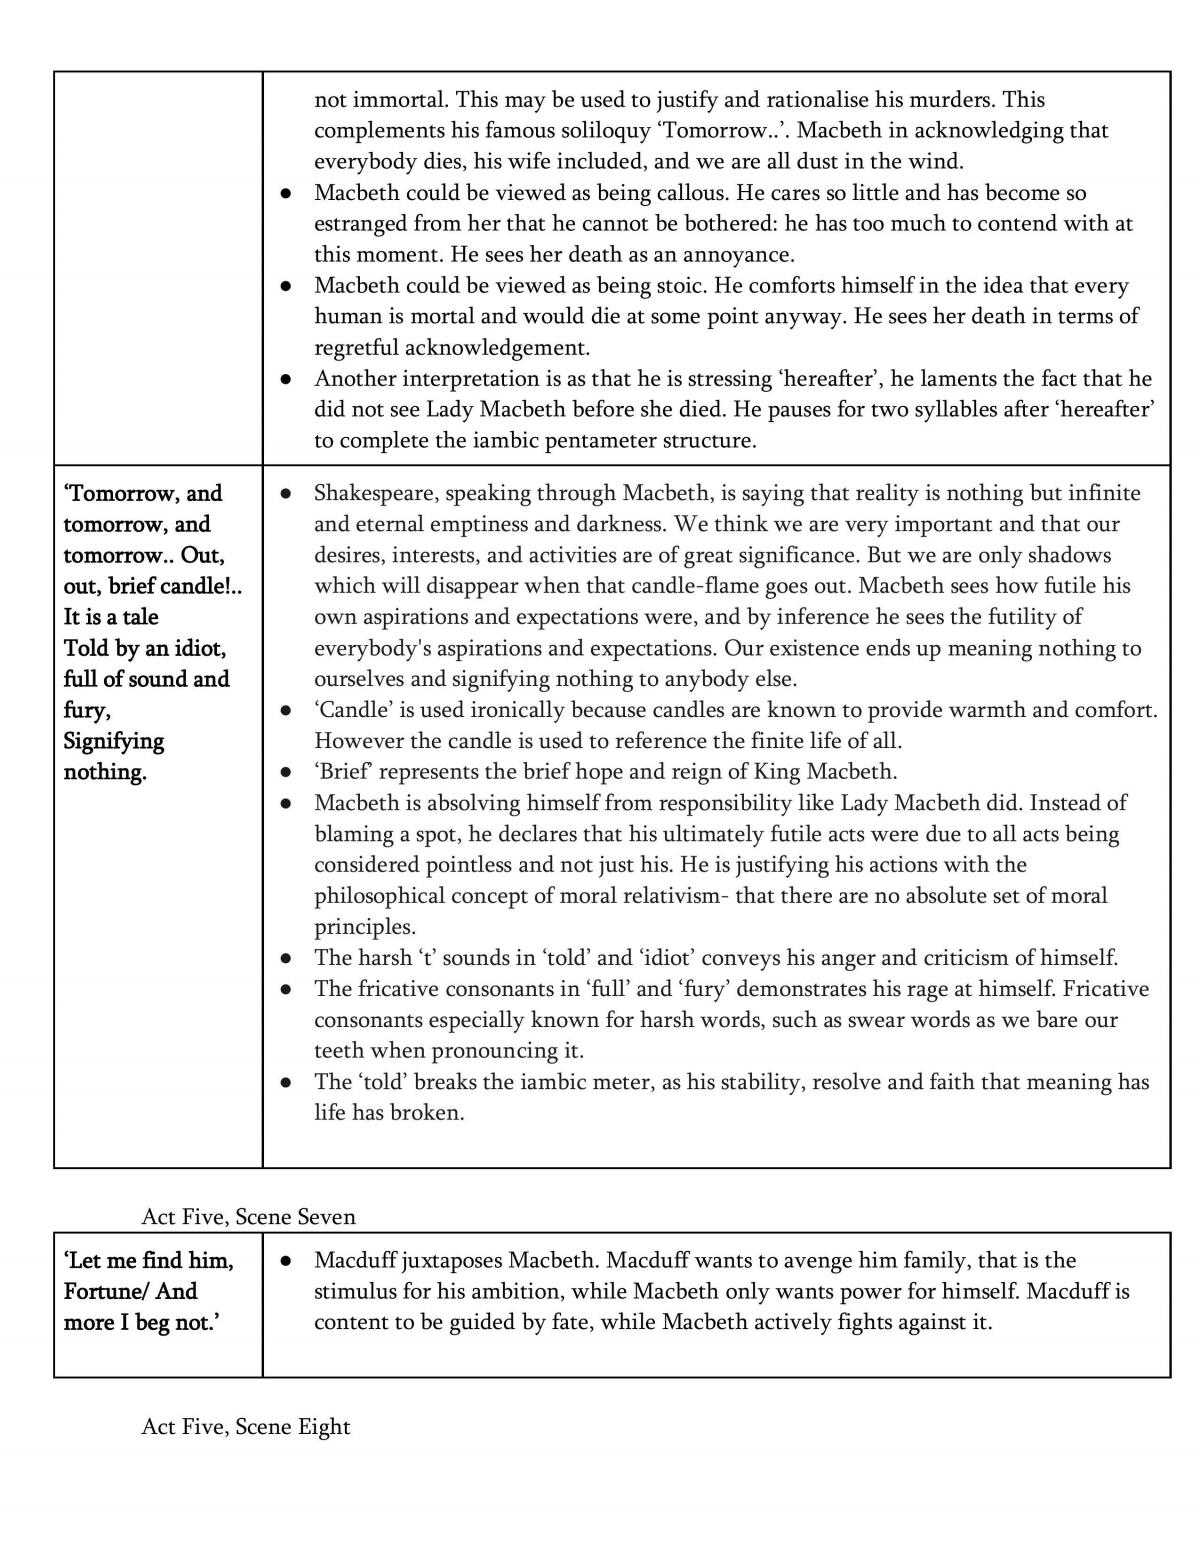 Macbeth NCEA Level 2 Written Text Full study notes - Page 21